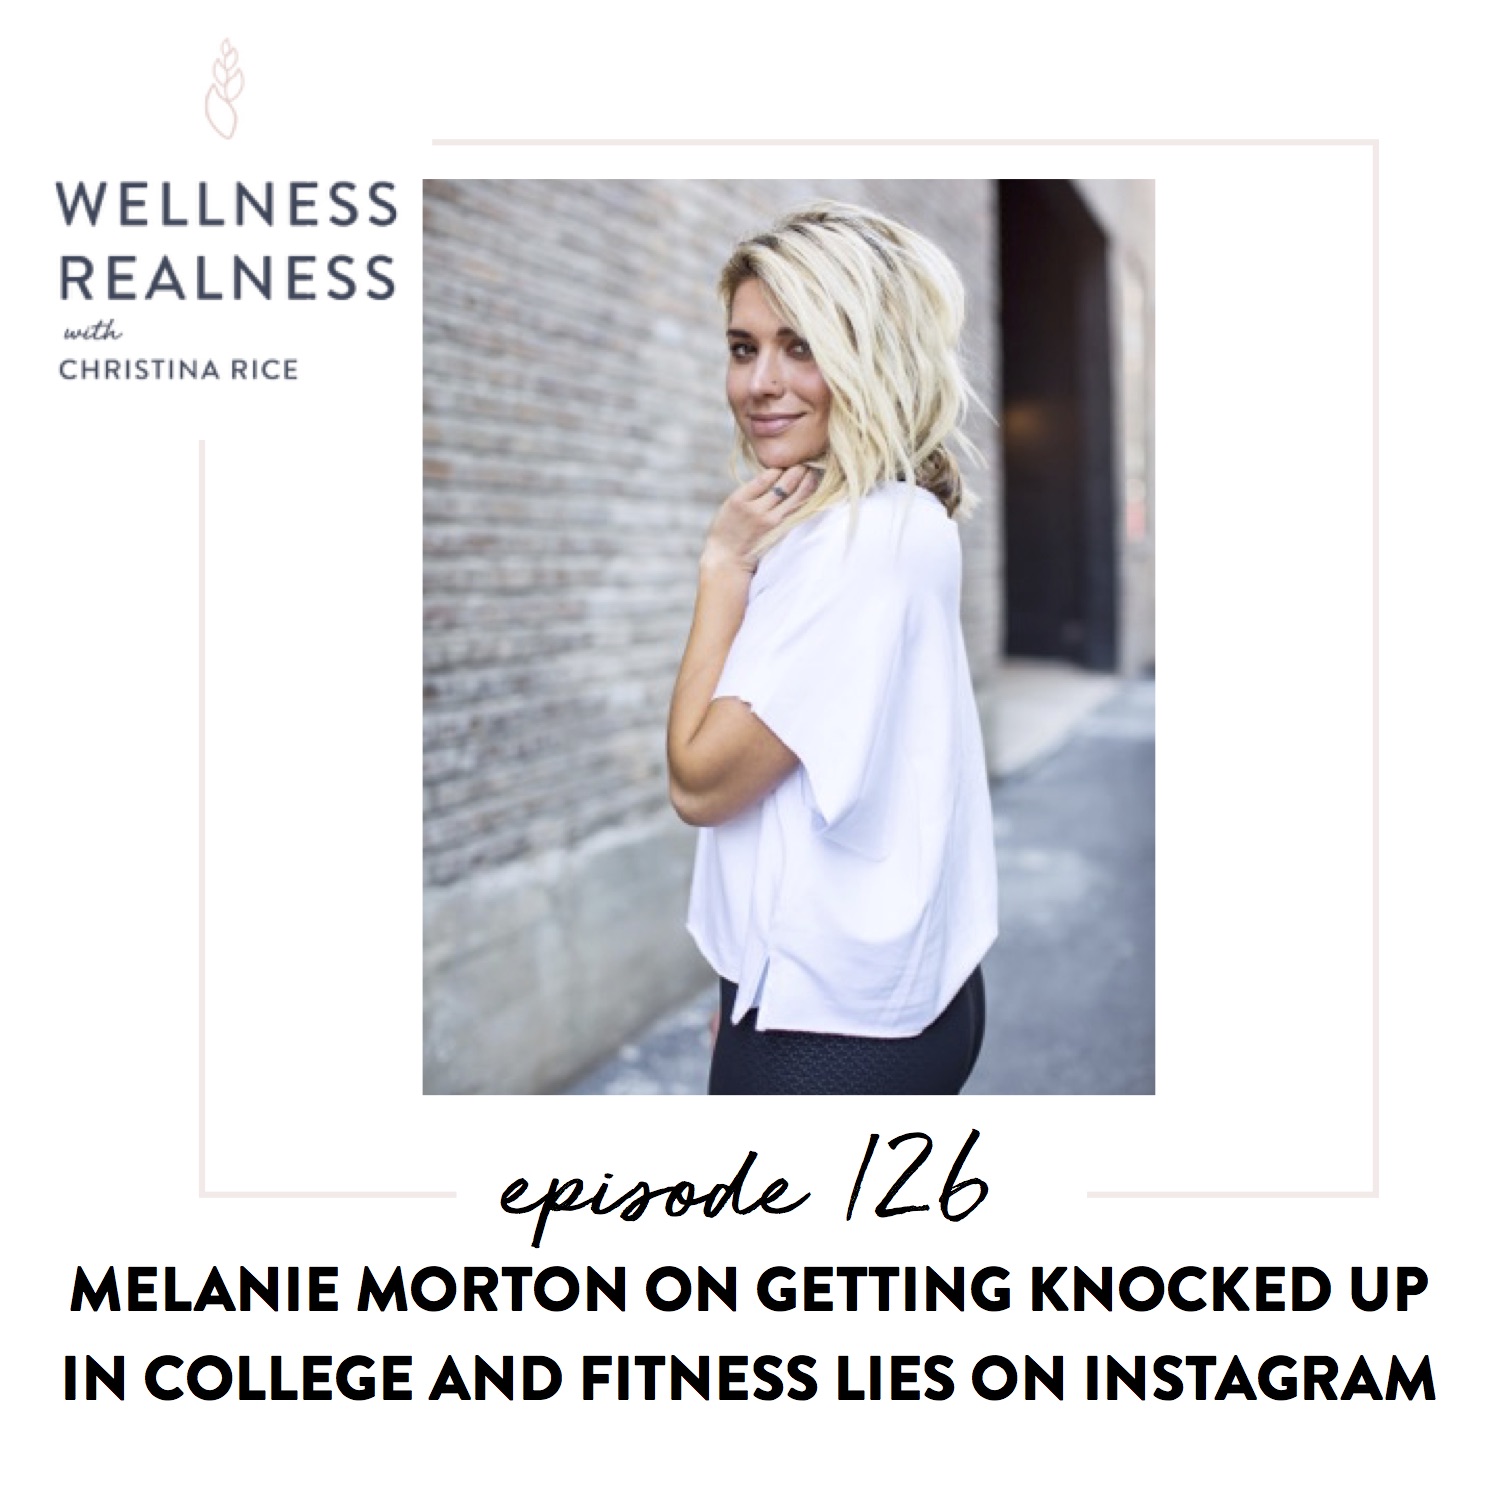 126: Melanie Morton on Getting Knocked Up in College and Fitness Lies on Instagram